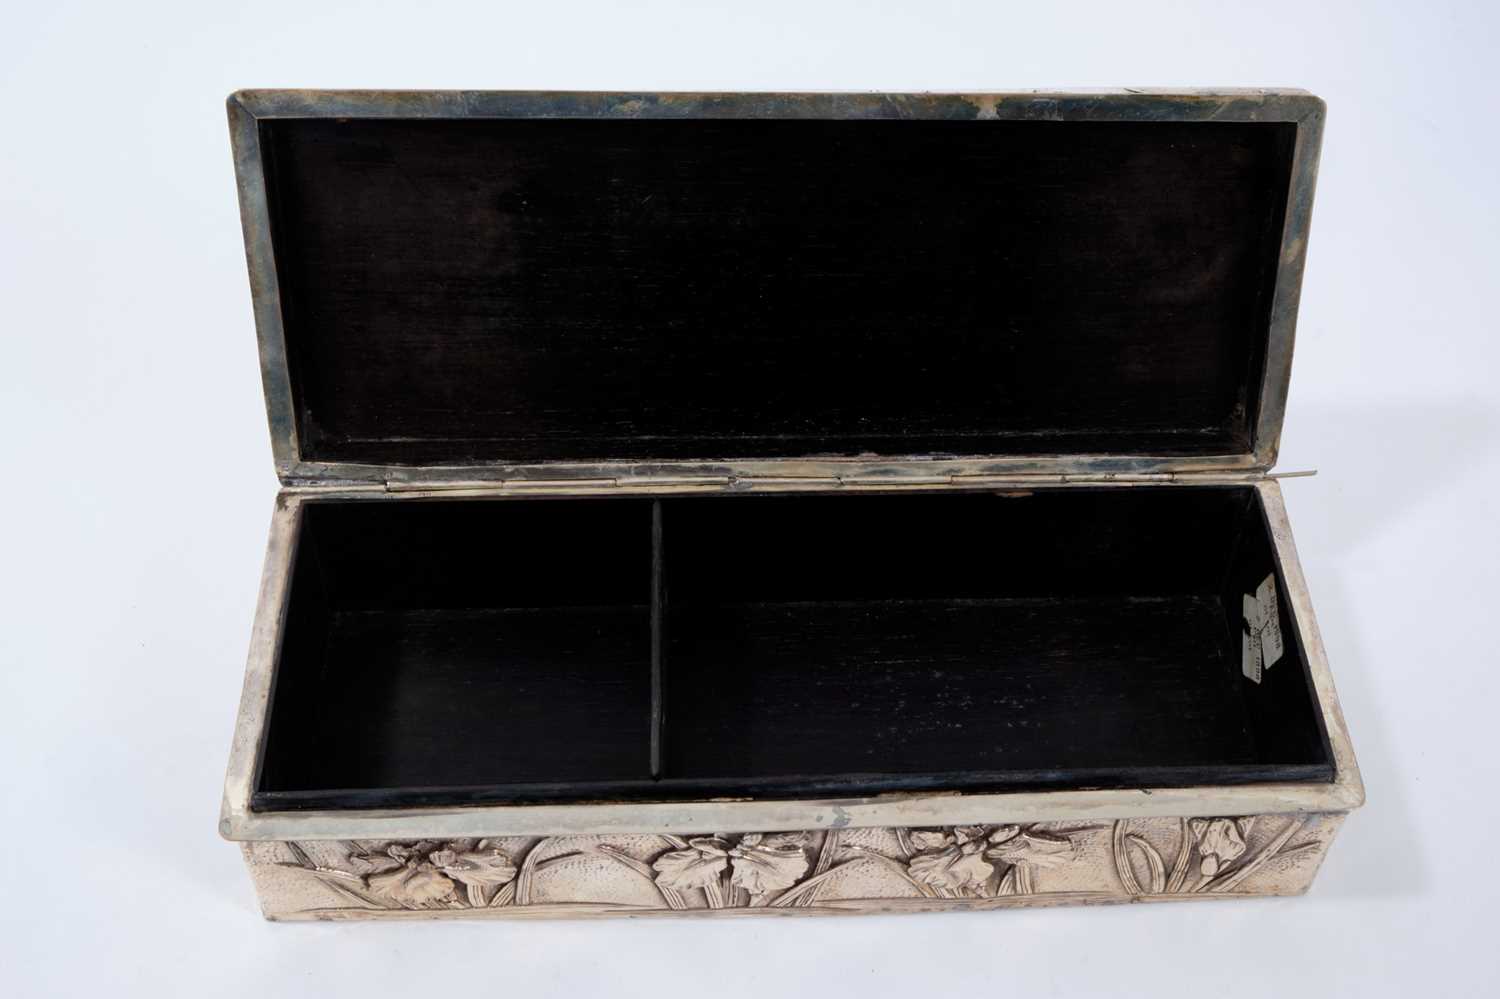 Late 19th/early 20th century Japanese silver box of rectangular form, with Iris floral decoration - Image 3 of 3